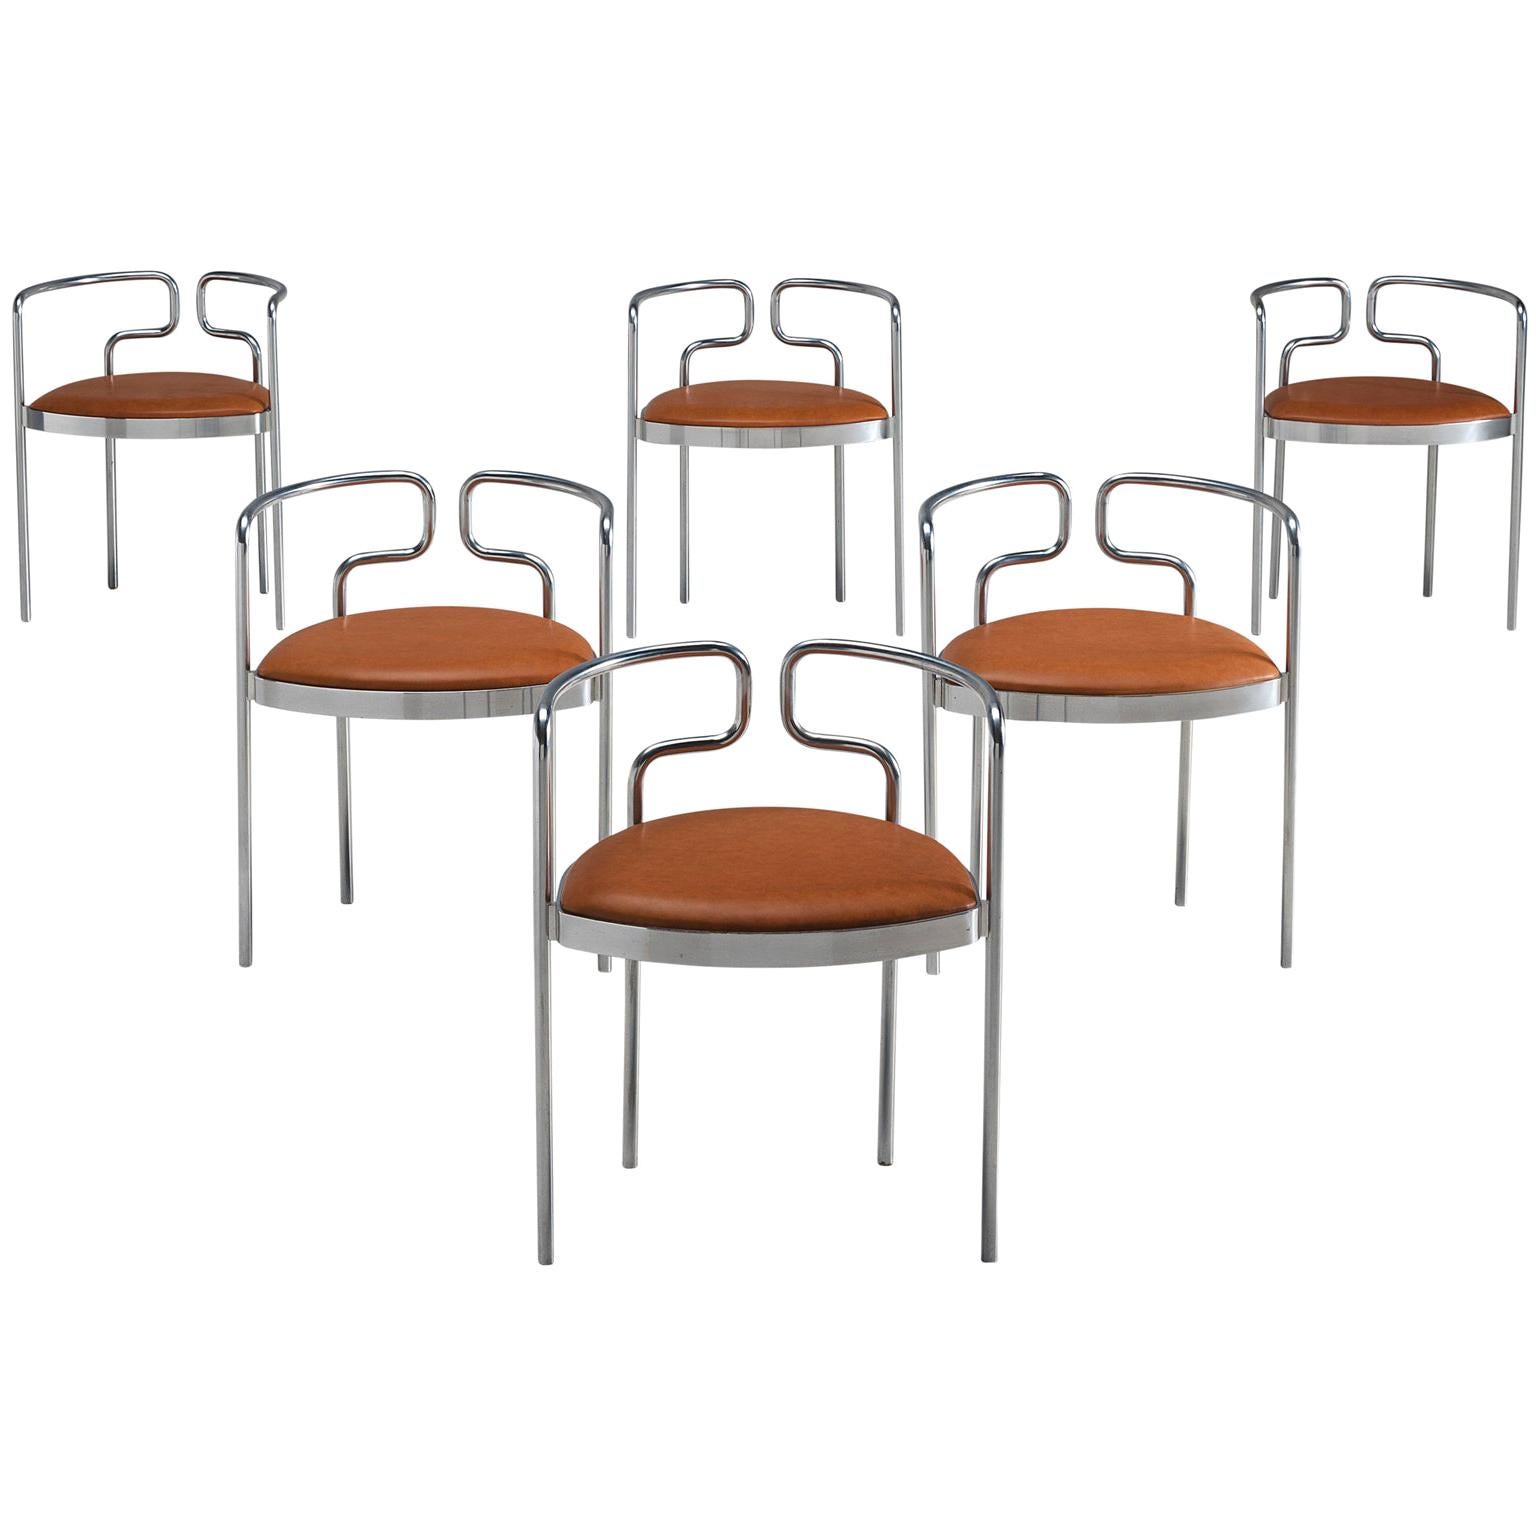 Henning Larsen Set of Six Tubular Dining Chairs with Cognac Leather